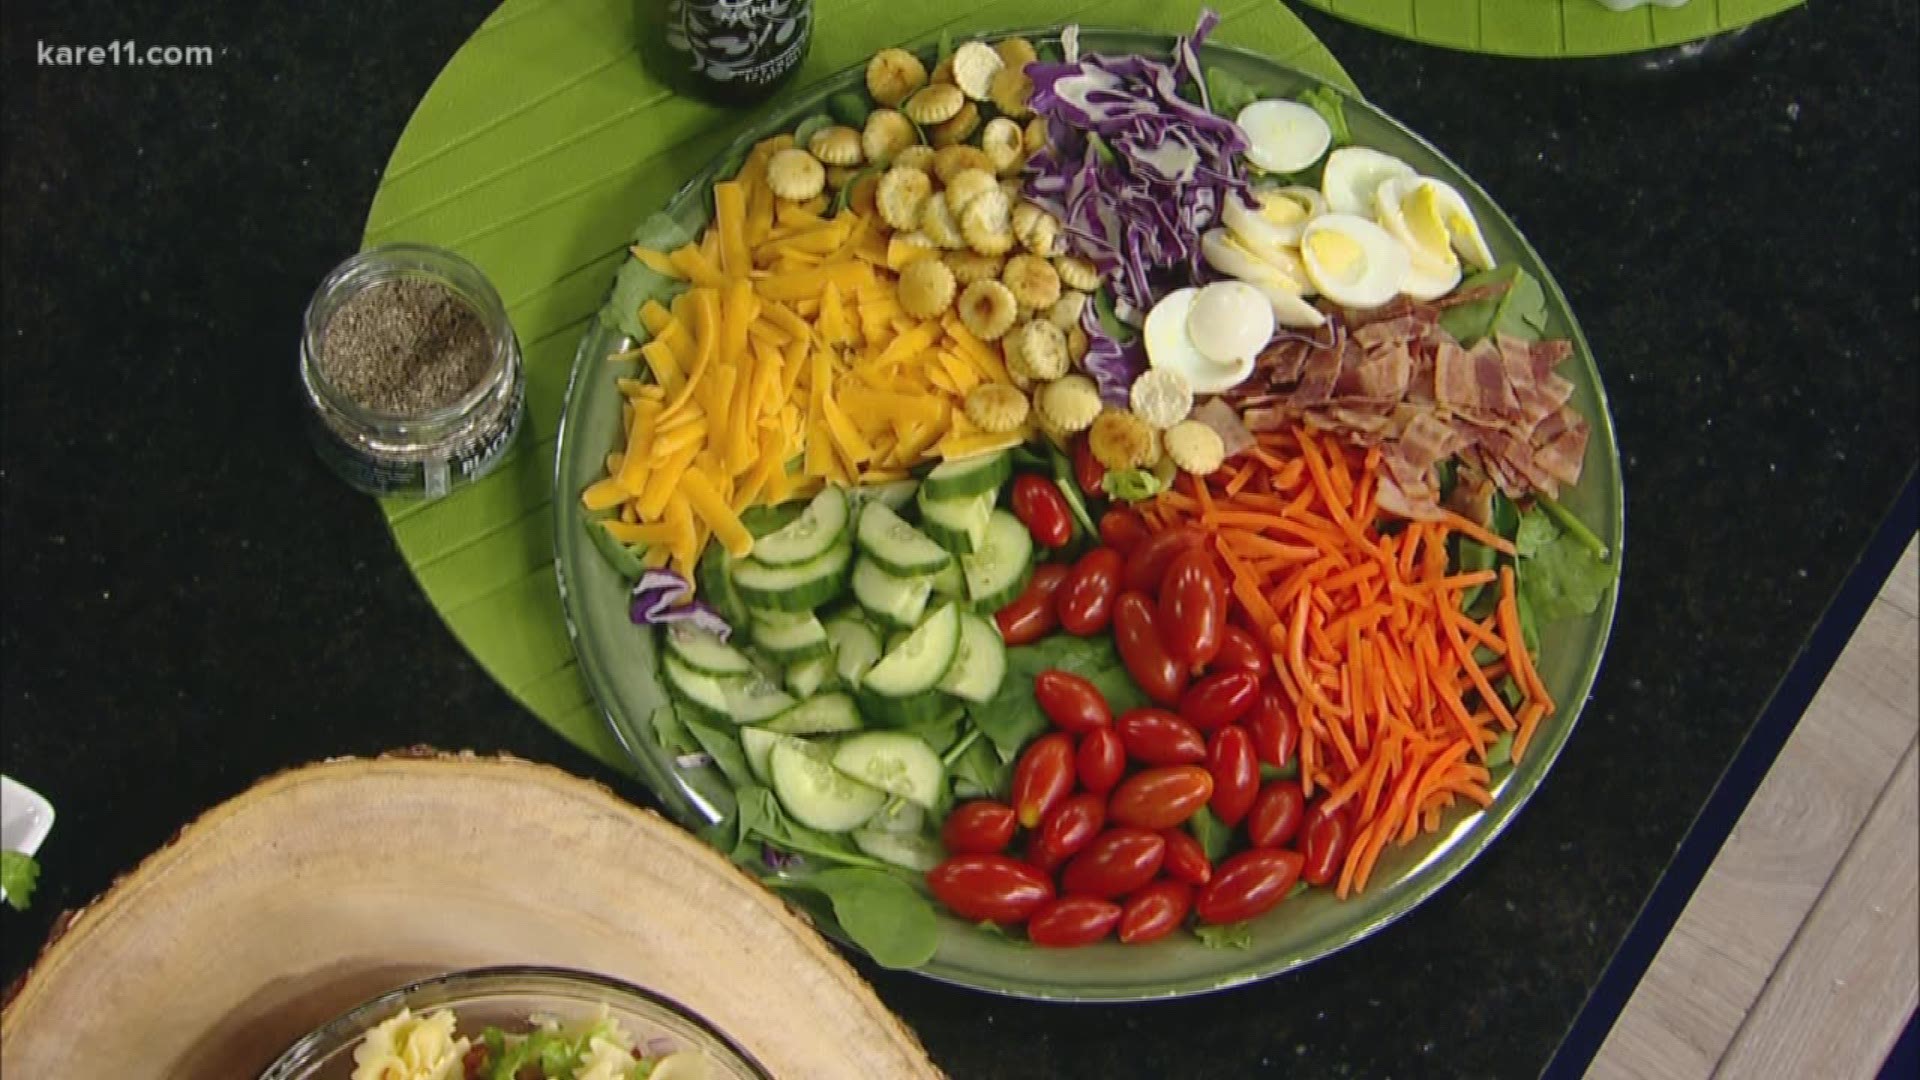 Terri Chaffer of Love That Olive in Maple Grove joined us to share several easy and inspired ideas for summer salads.